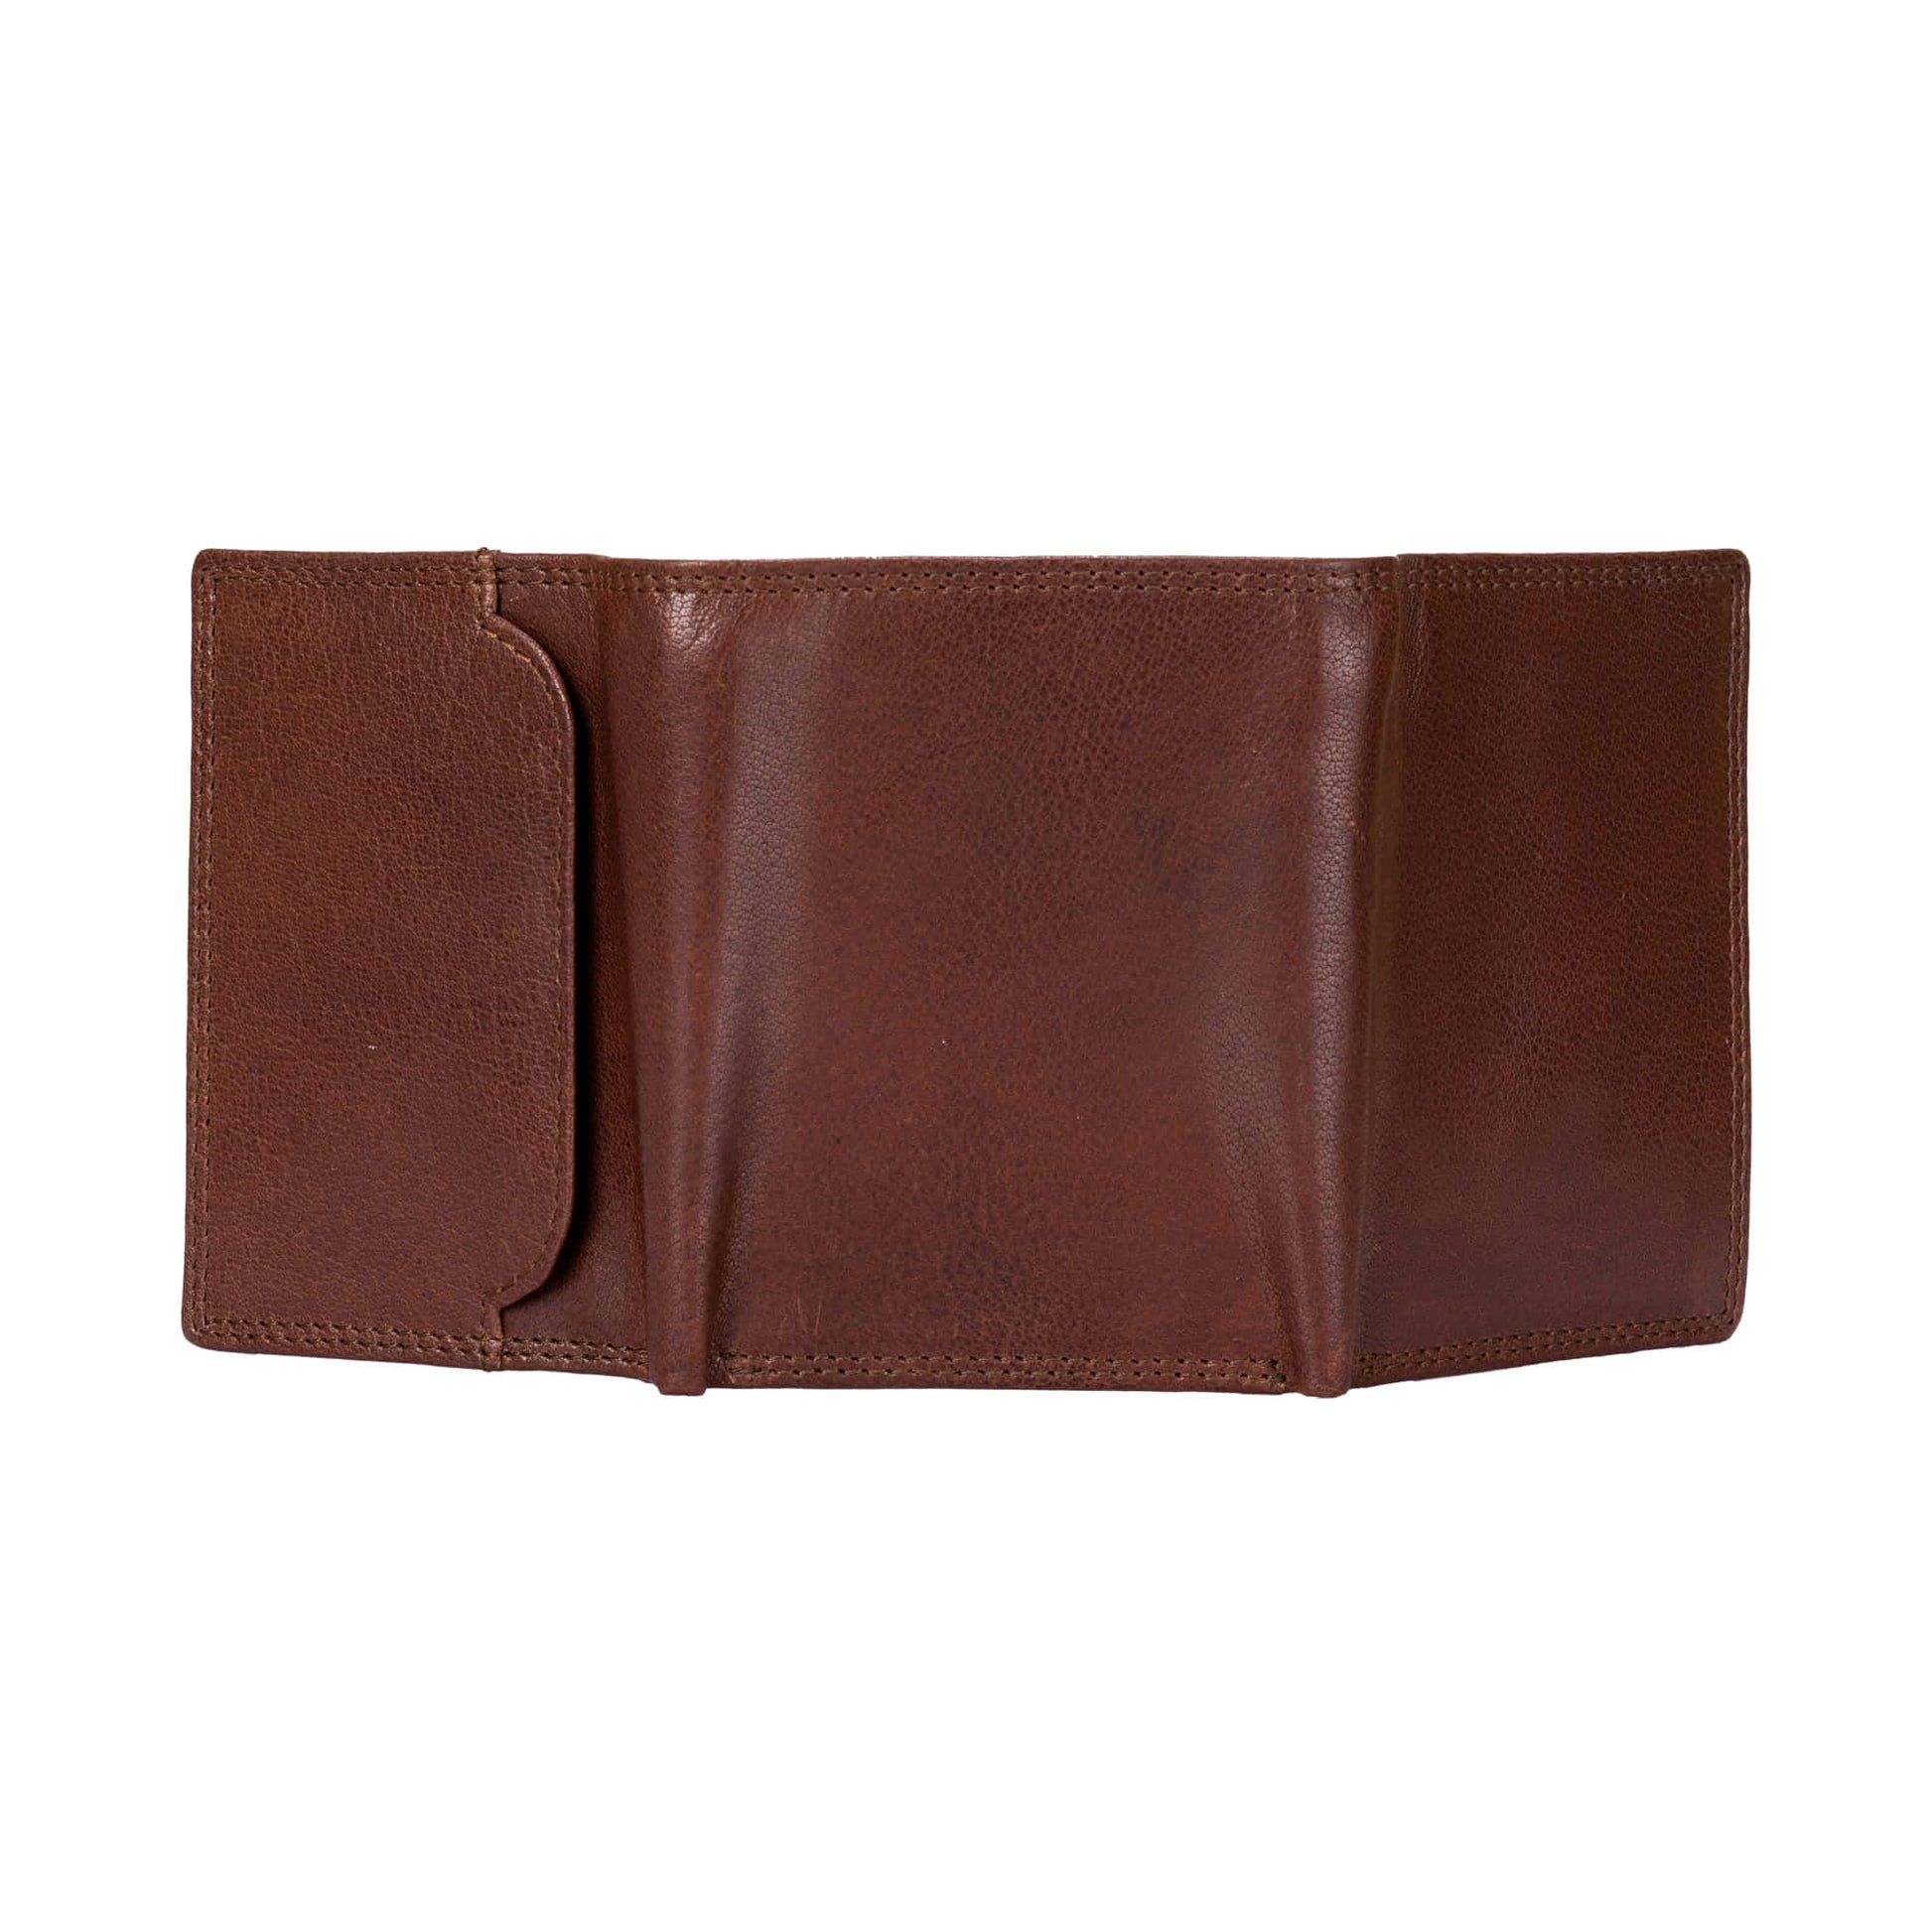 Style n Craft 301791 Trifold Wallet in Vintage Full Grain Leather - brown color - open view  of the outside of the wallet showing the outside pocket & the double stitching